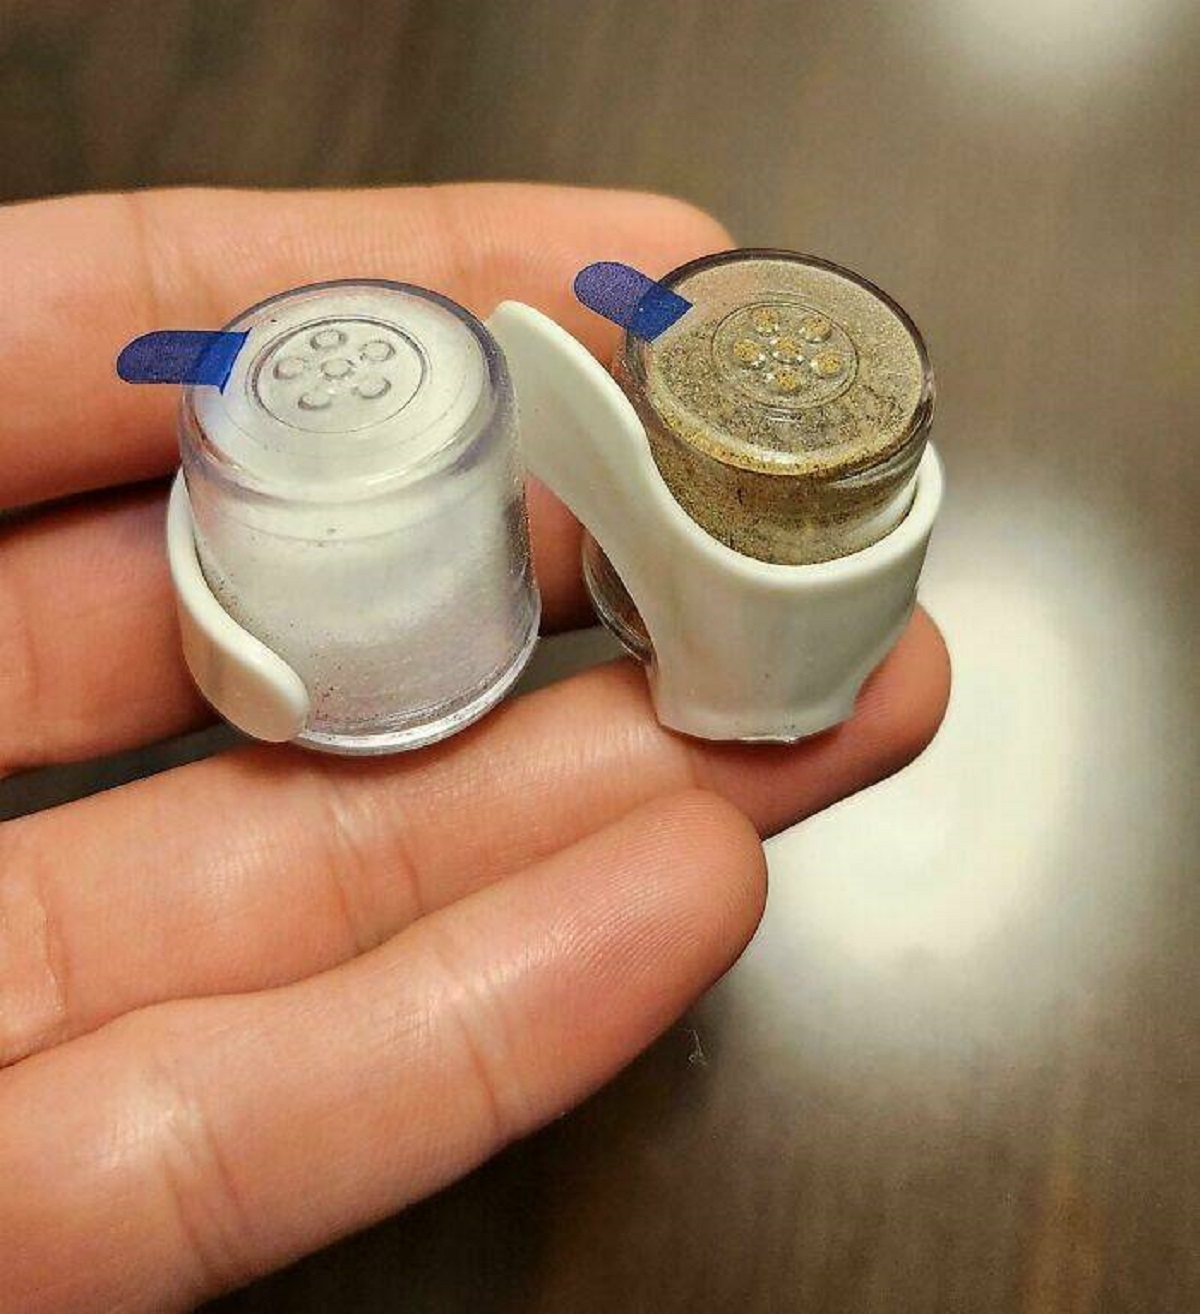 "My Hotel Room Provided Disposable Salt And Pepper Shakers"